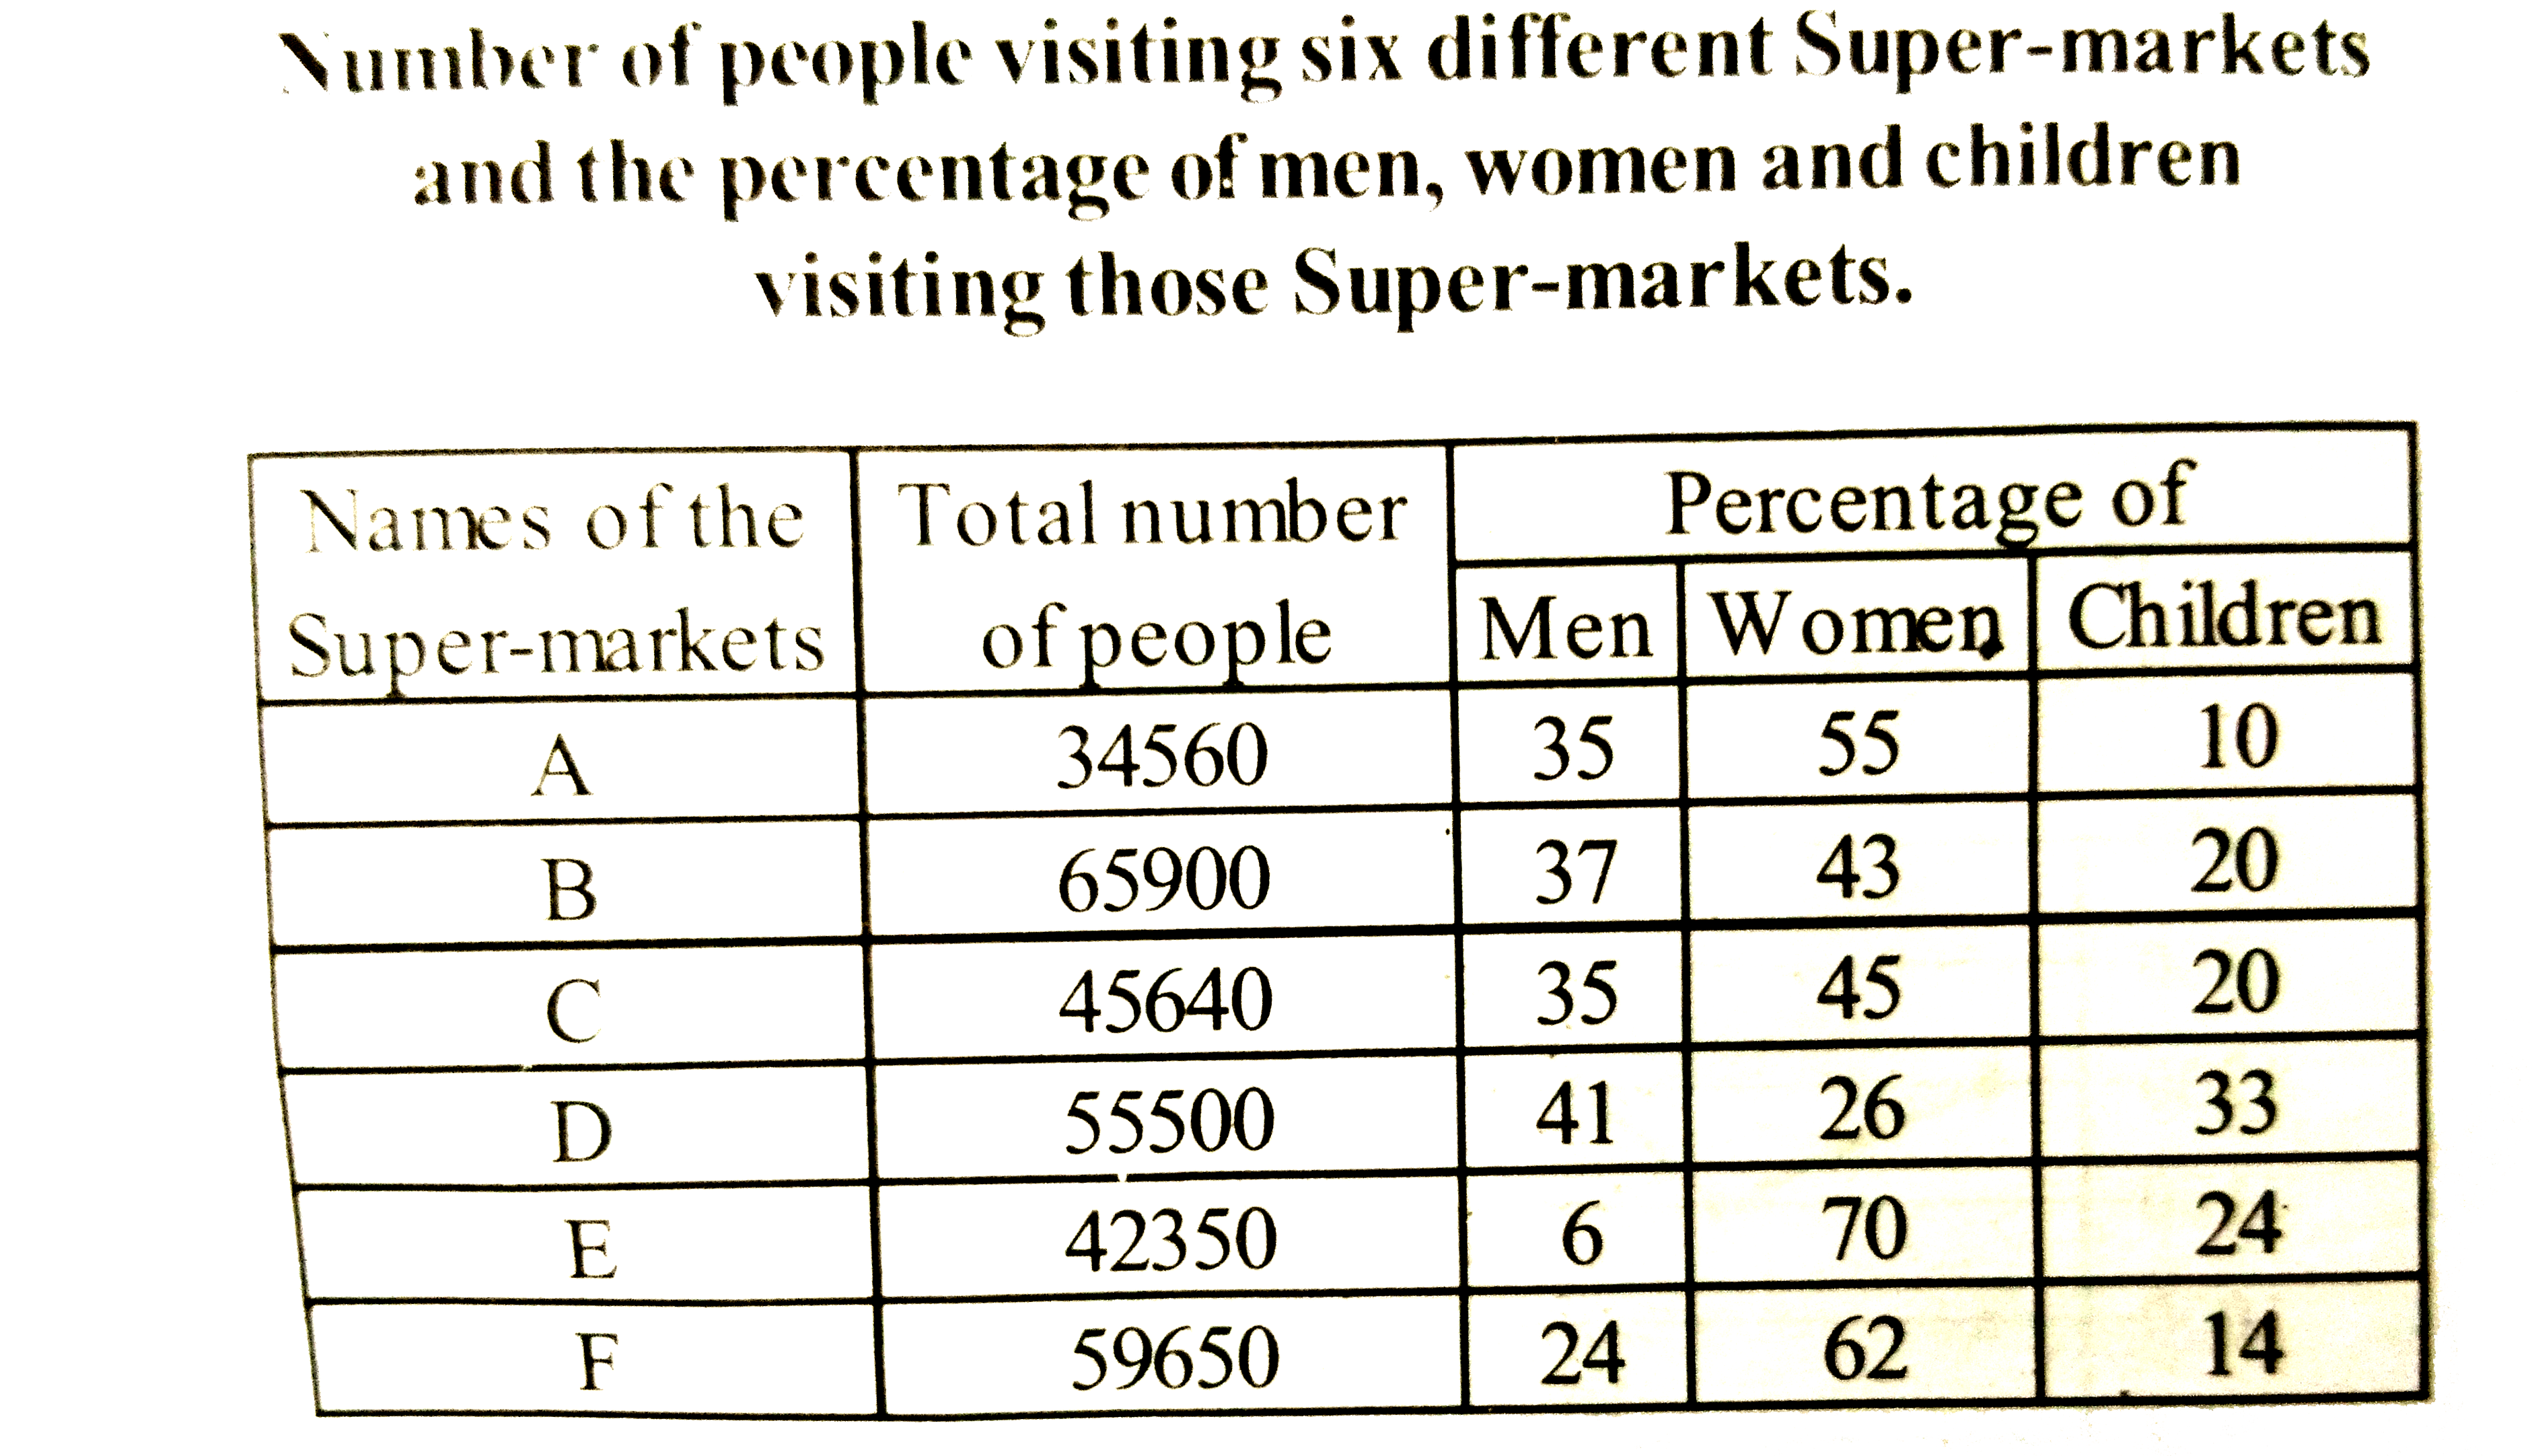 Number of men visiting Super-market D from approximtely what percent of the total number of people visiting all the Super-markets together ?